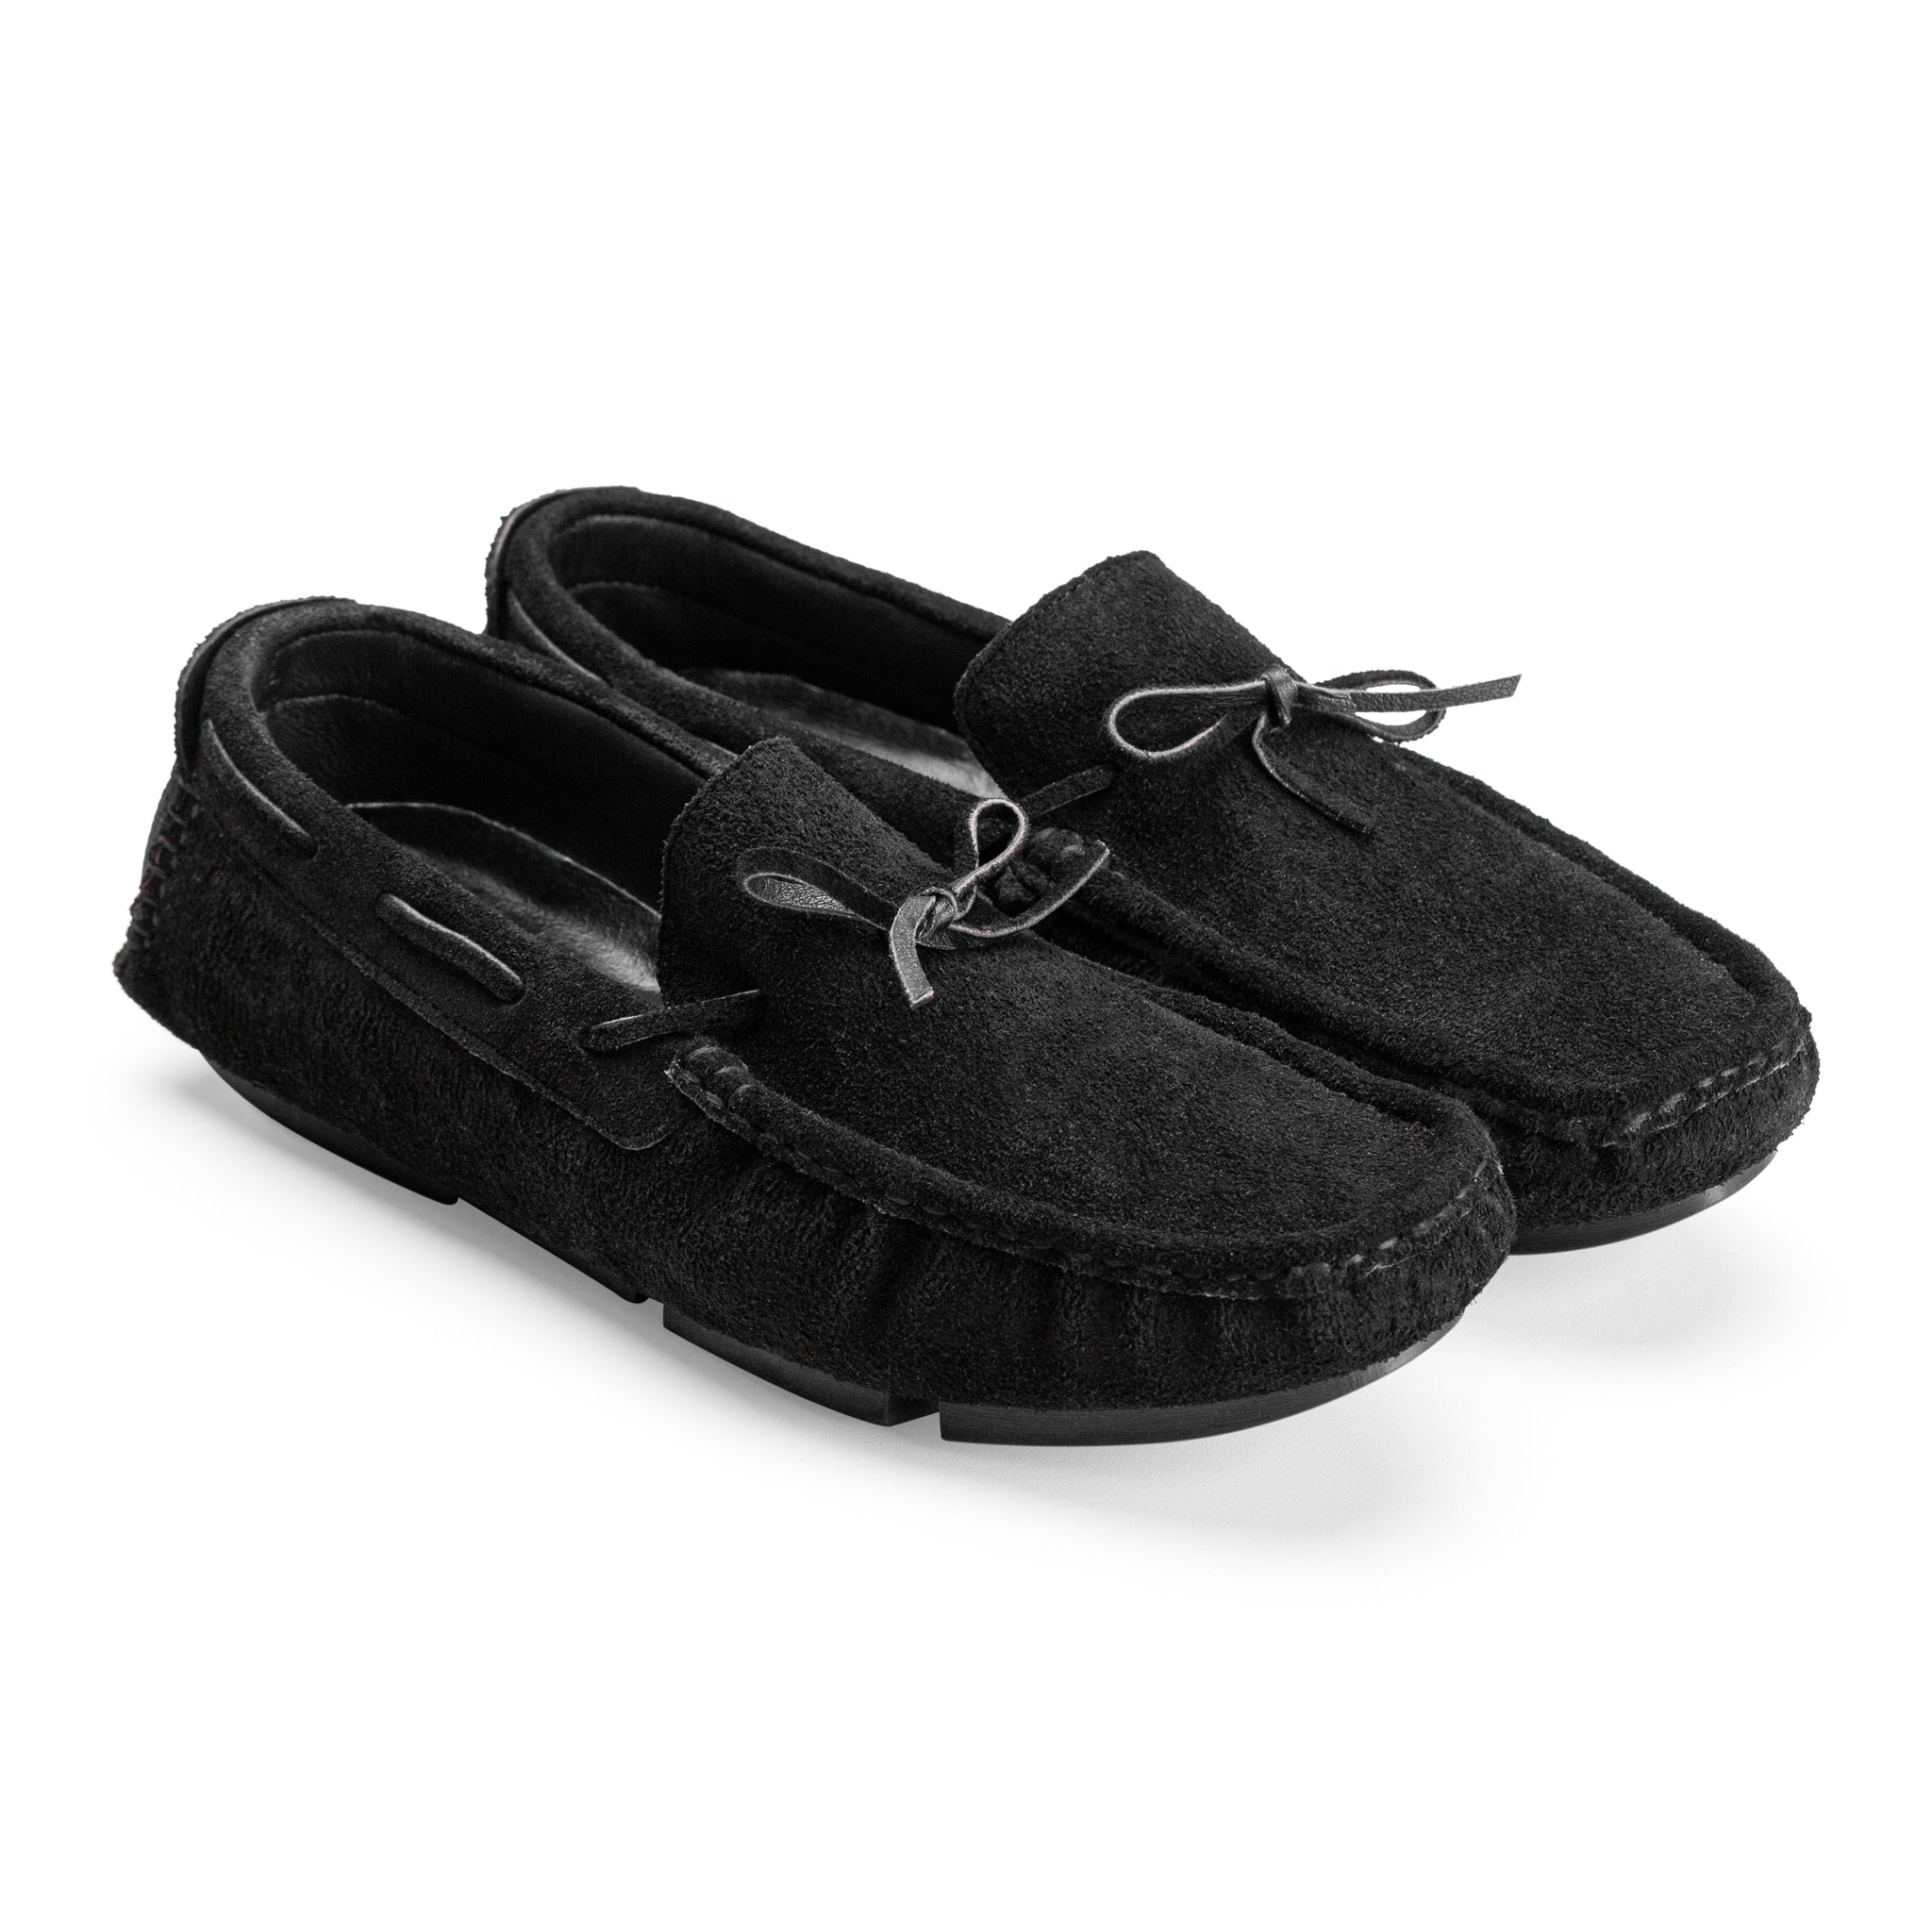 Moccasins | Suede calf leather rubber sole -Black